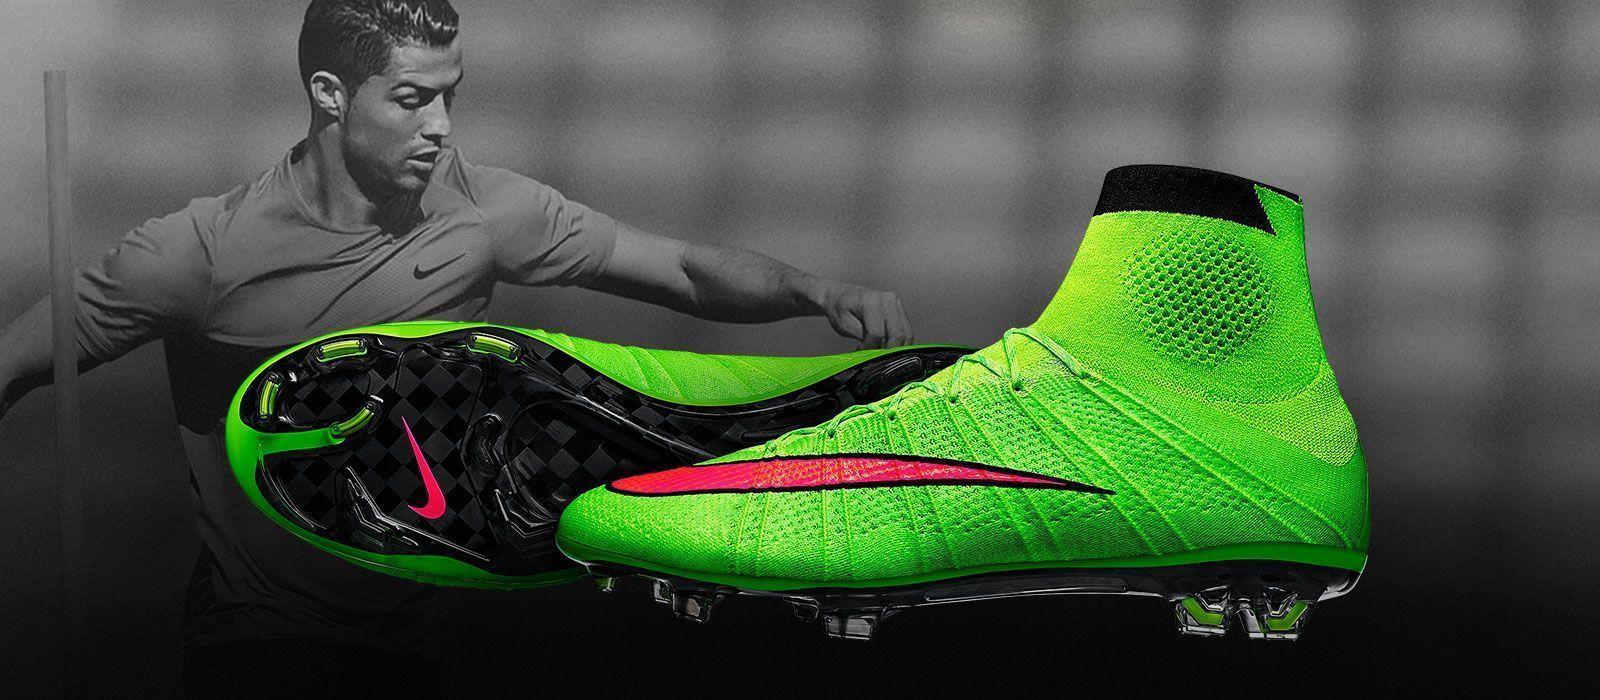 image For > Nike Mercurial 2014 Cr7 Indoor